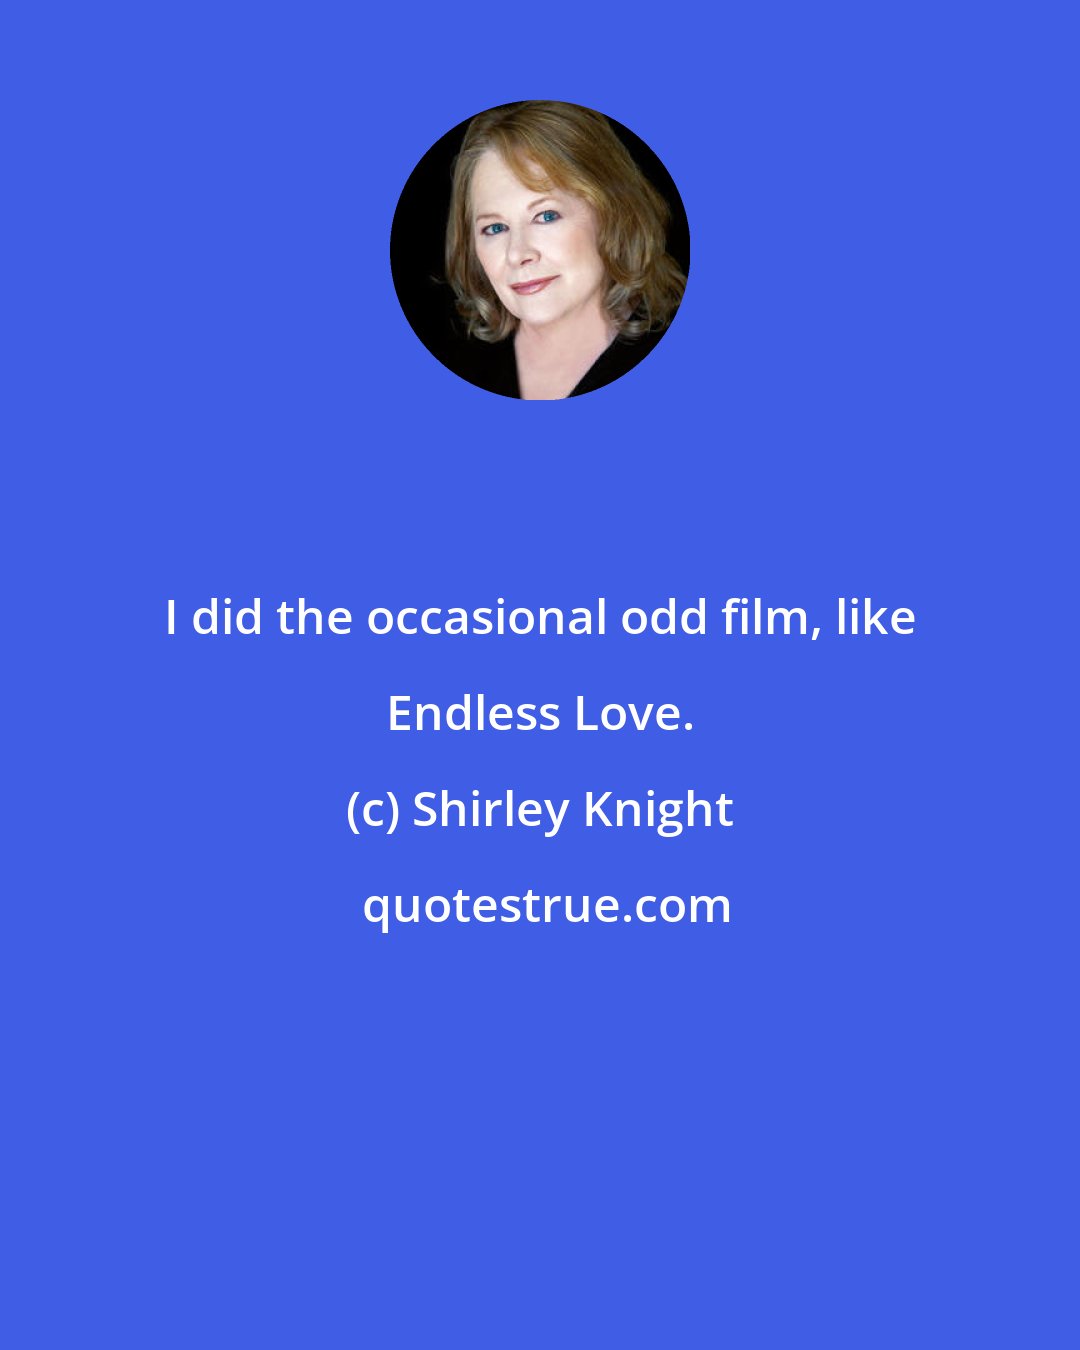 Shirley Knight: I did the occasional odd film, like Endless Love.